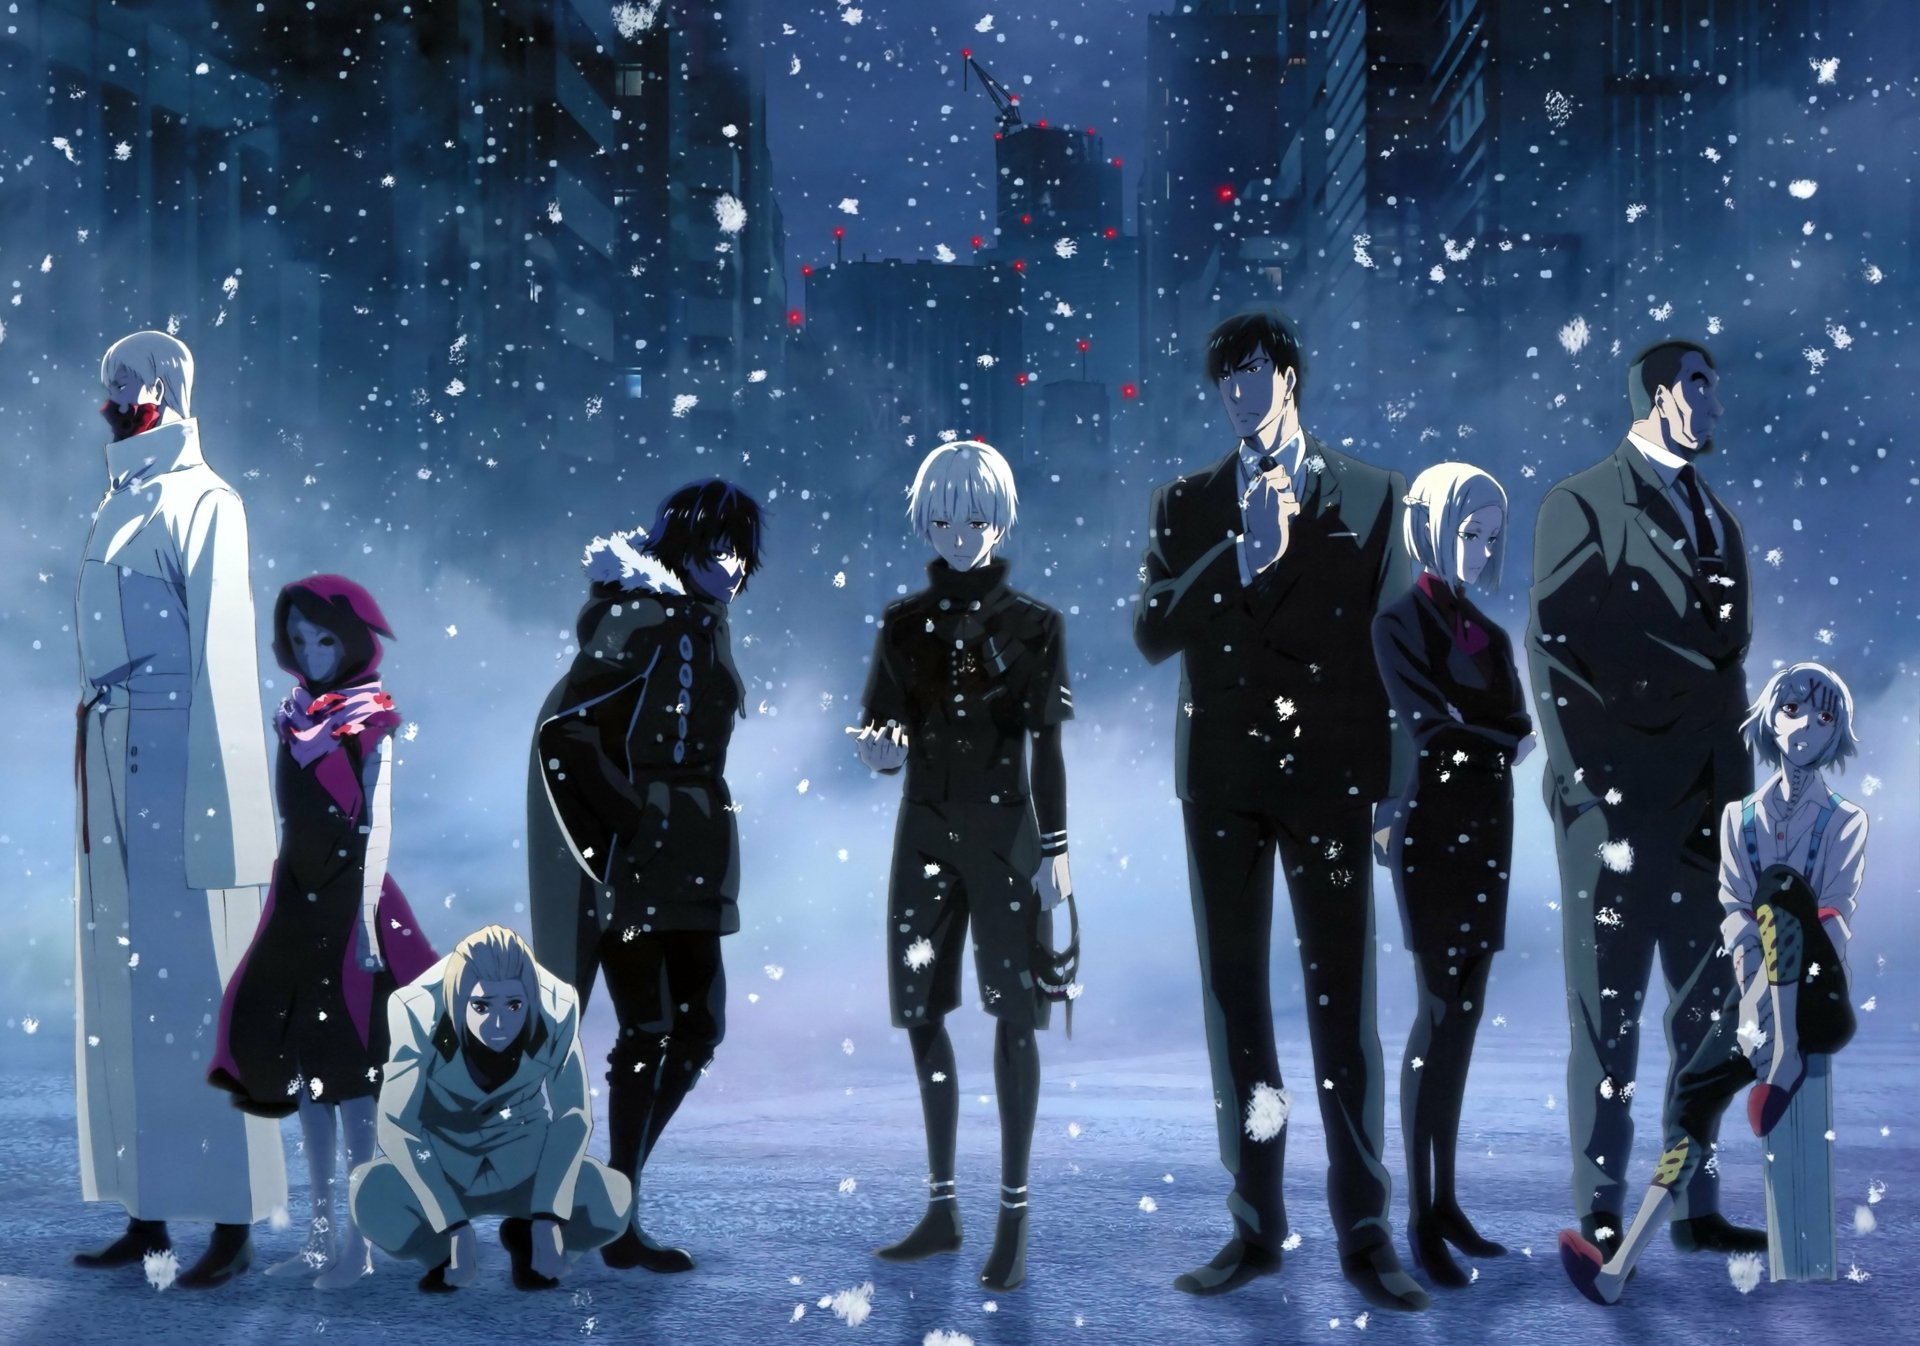 Tatara Tokyo Ghoul wallpapers for desktop download free Tatara Tokyo  Ghoul pictures and backgrounds for PC  moborg